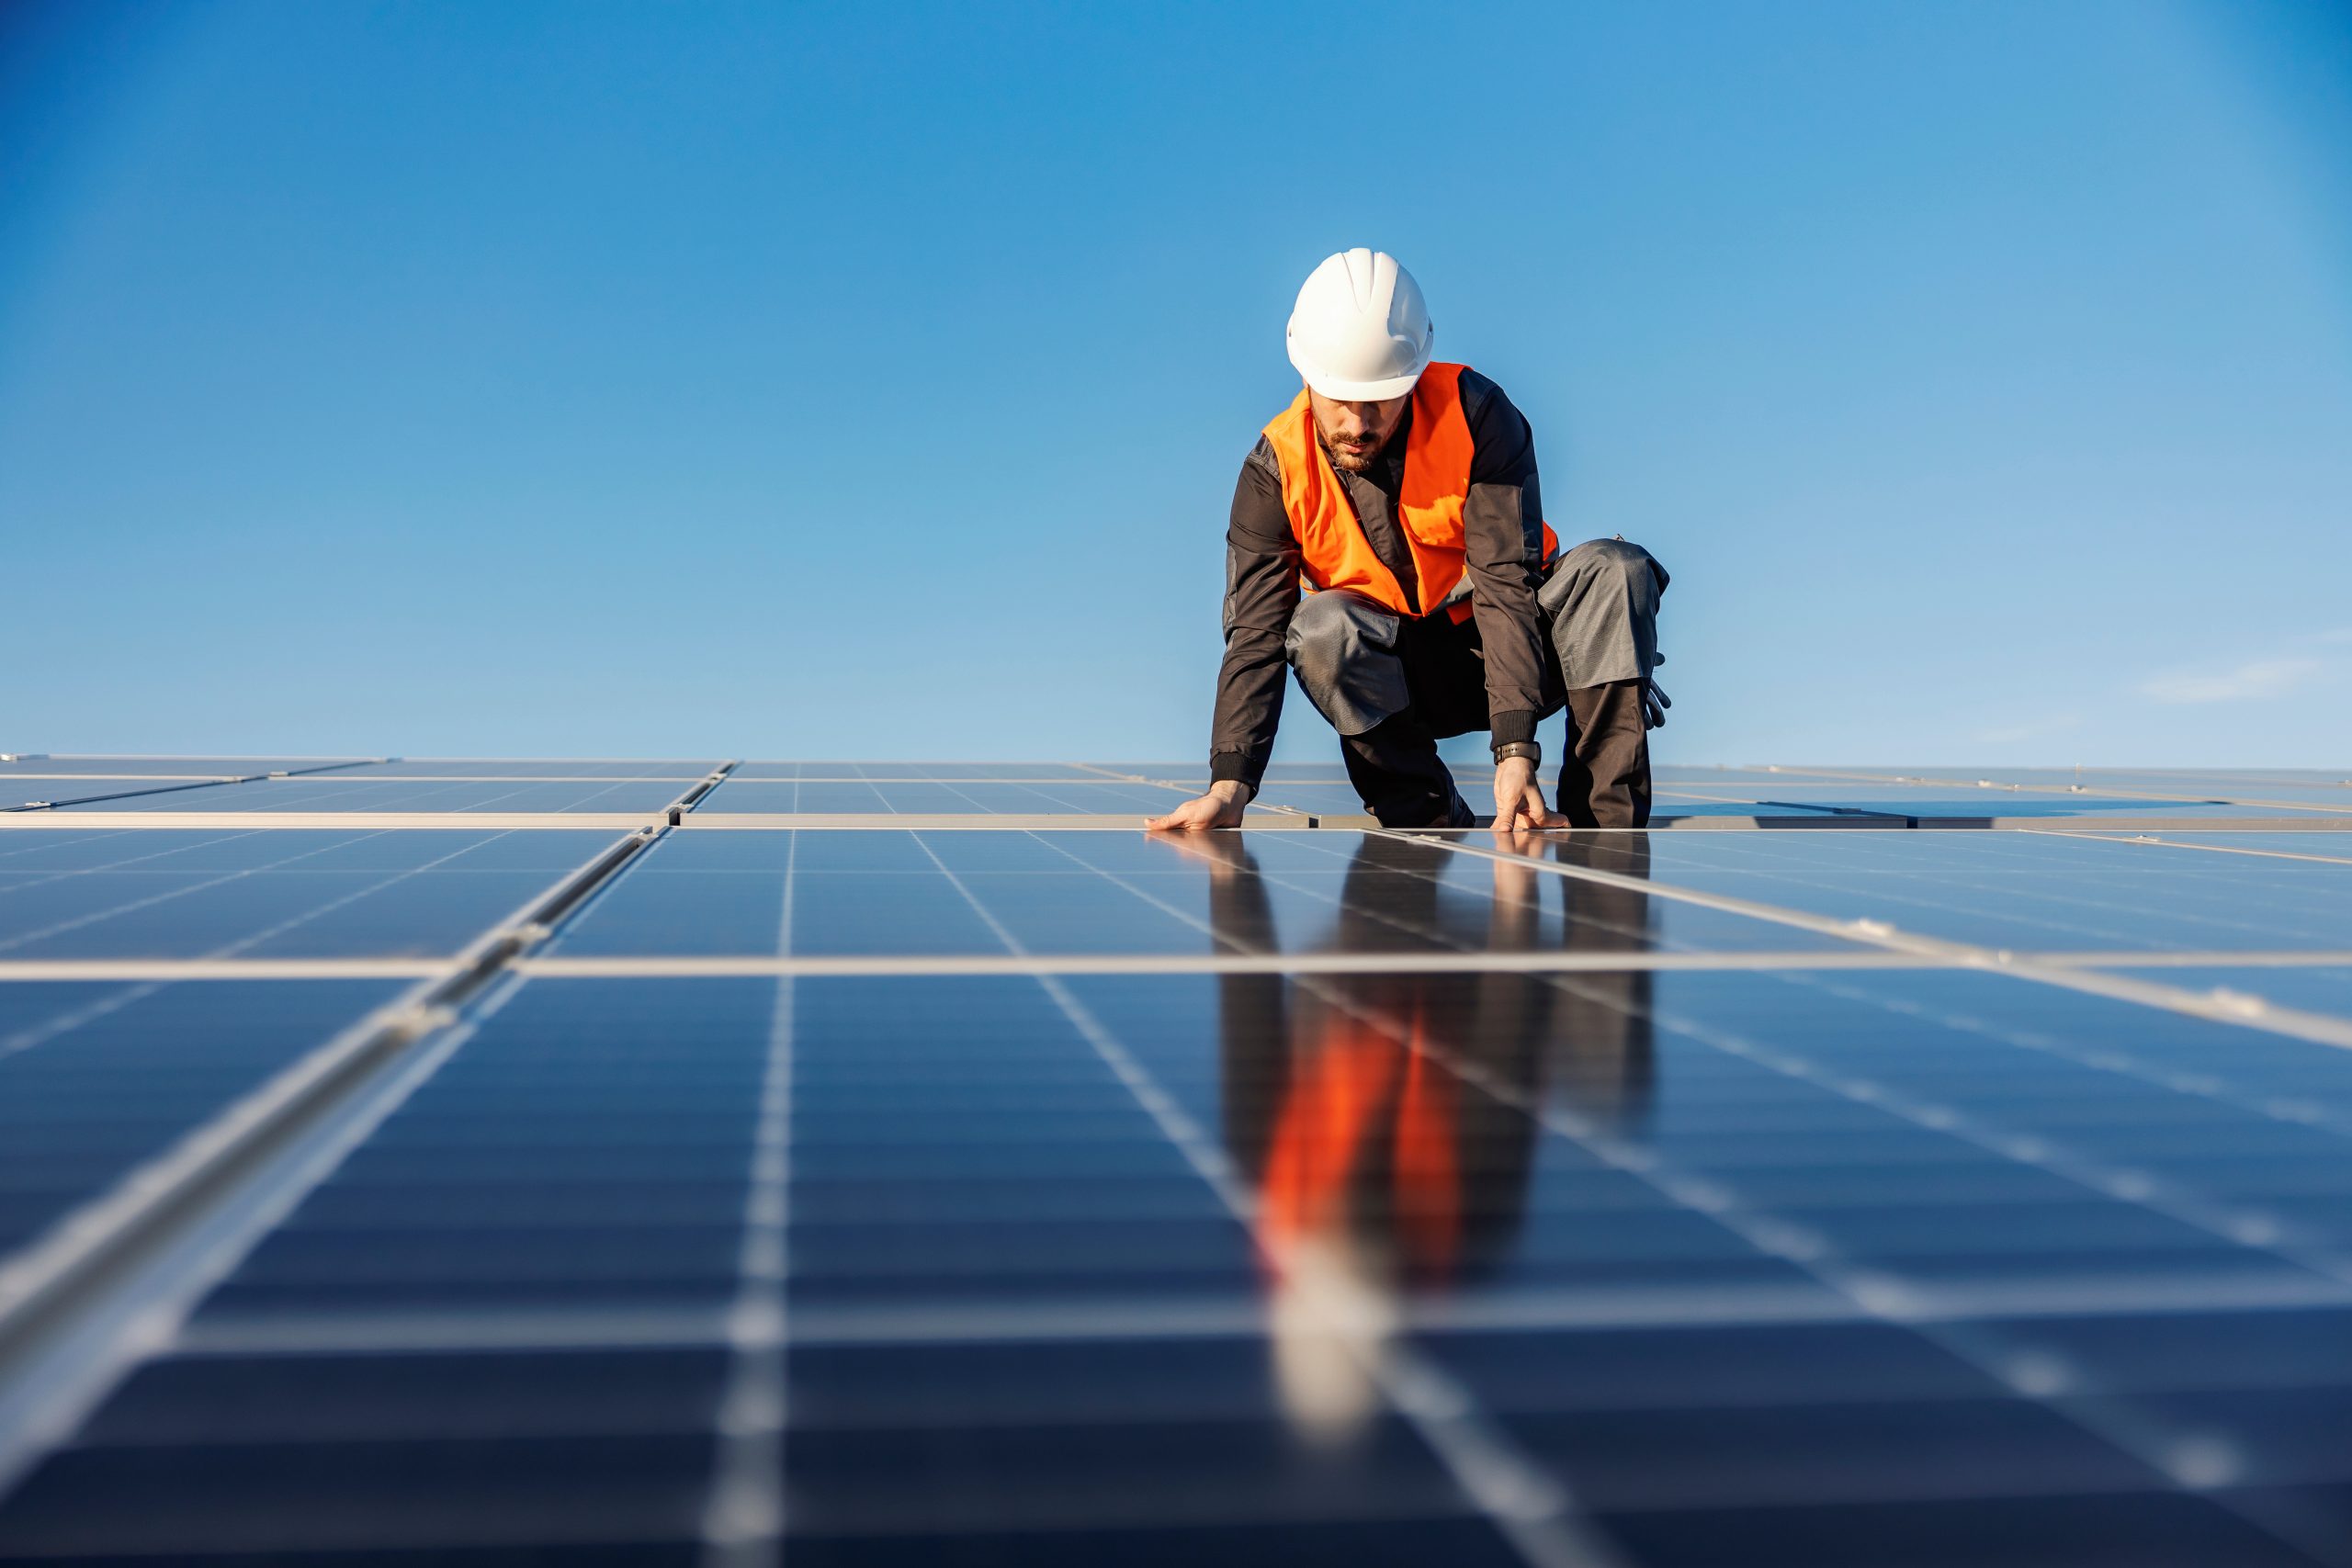 Solar installation worker with solar panels on a roof.